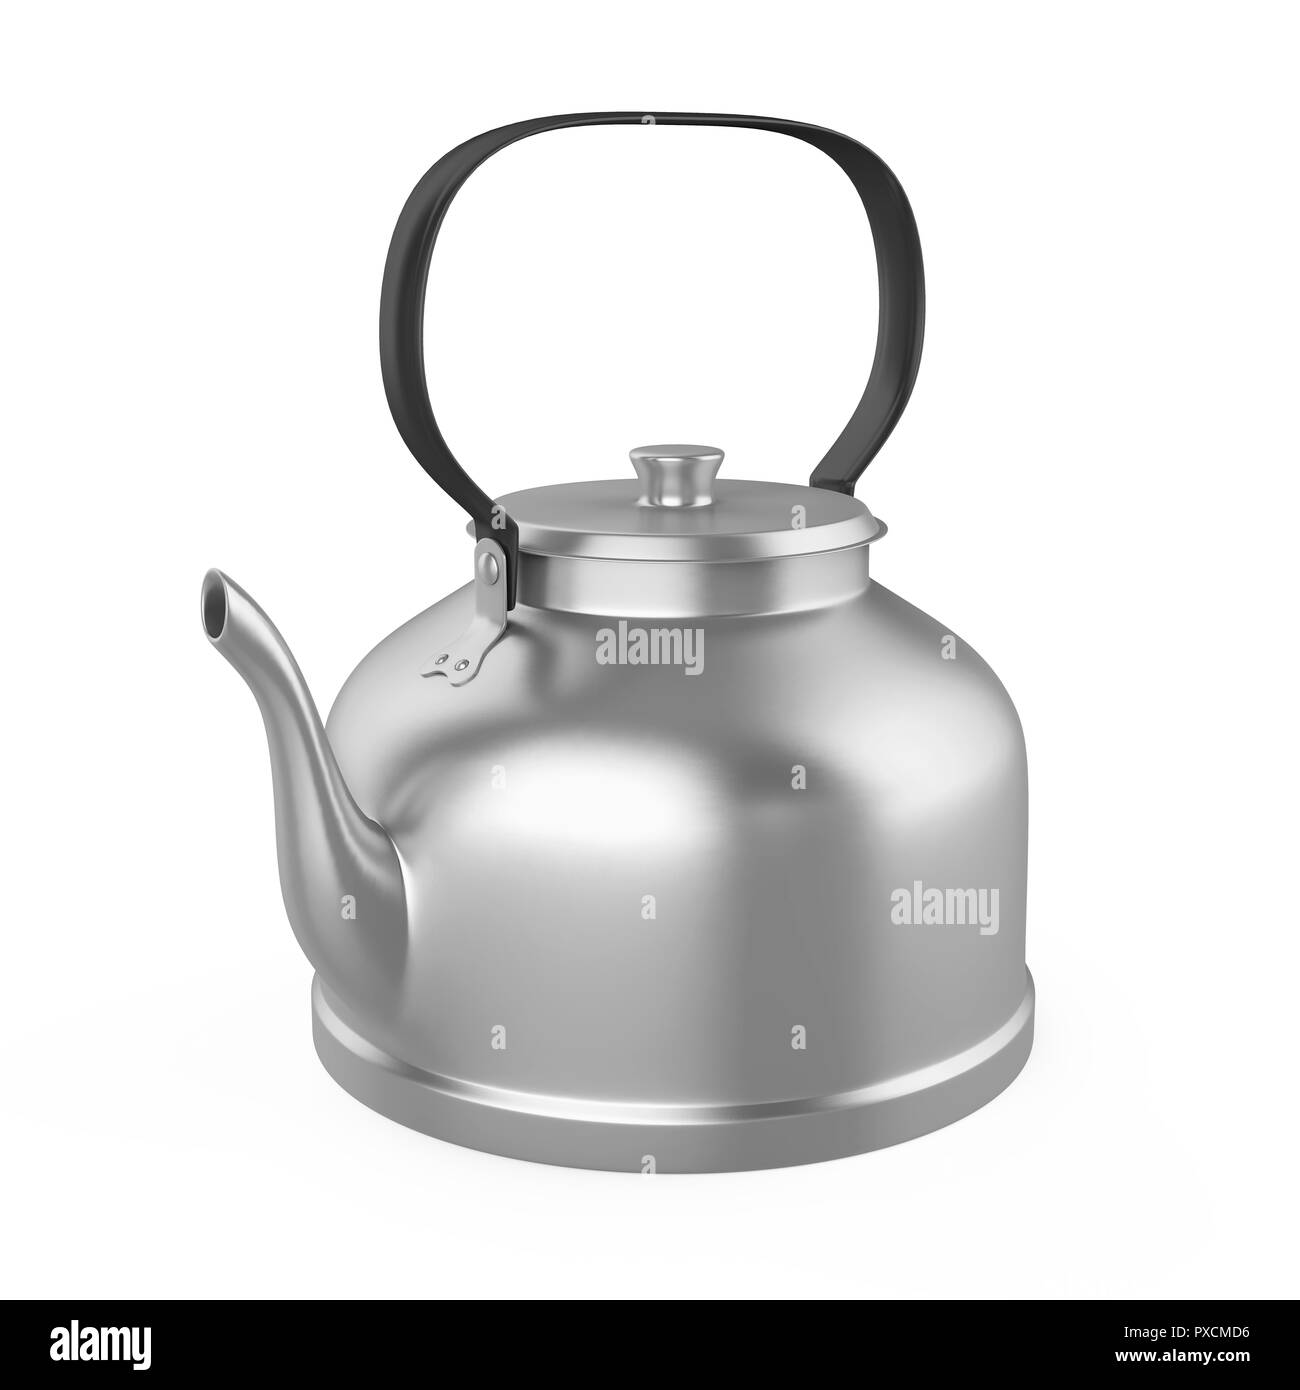 https://c8.alamy.com/comp/PXCMD6/stovetop-whistling-kettle-isolated-PXCMD6.jpg